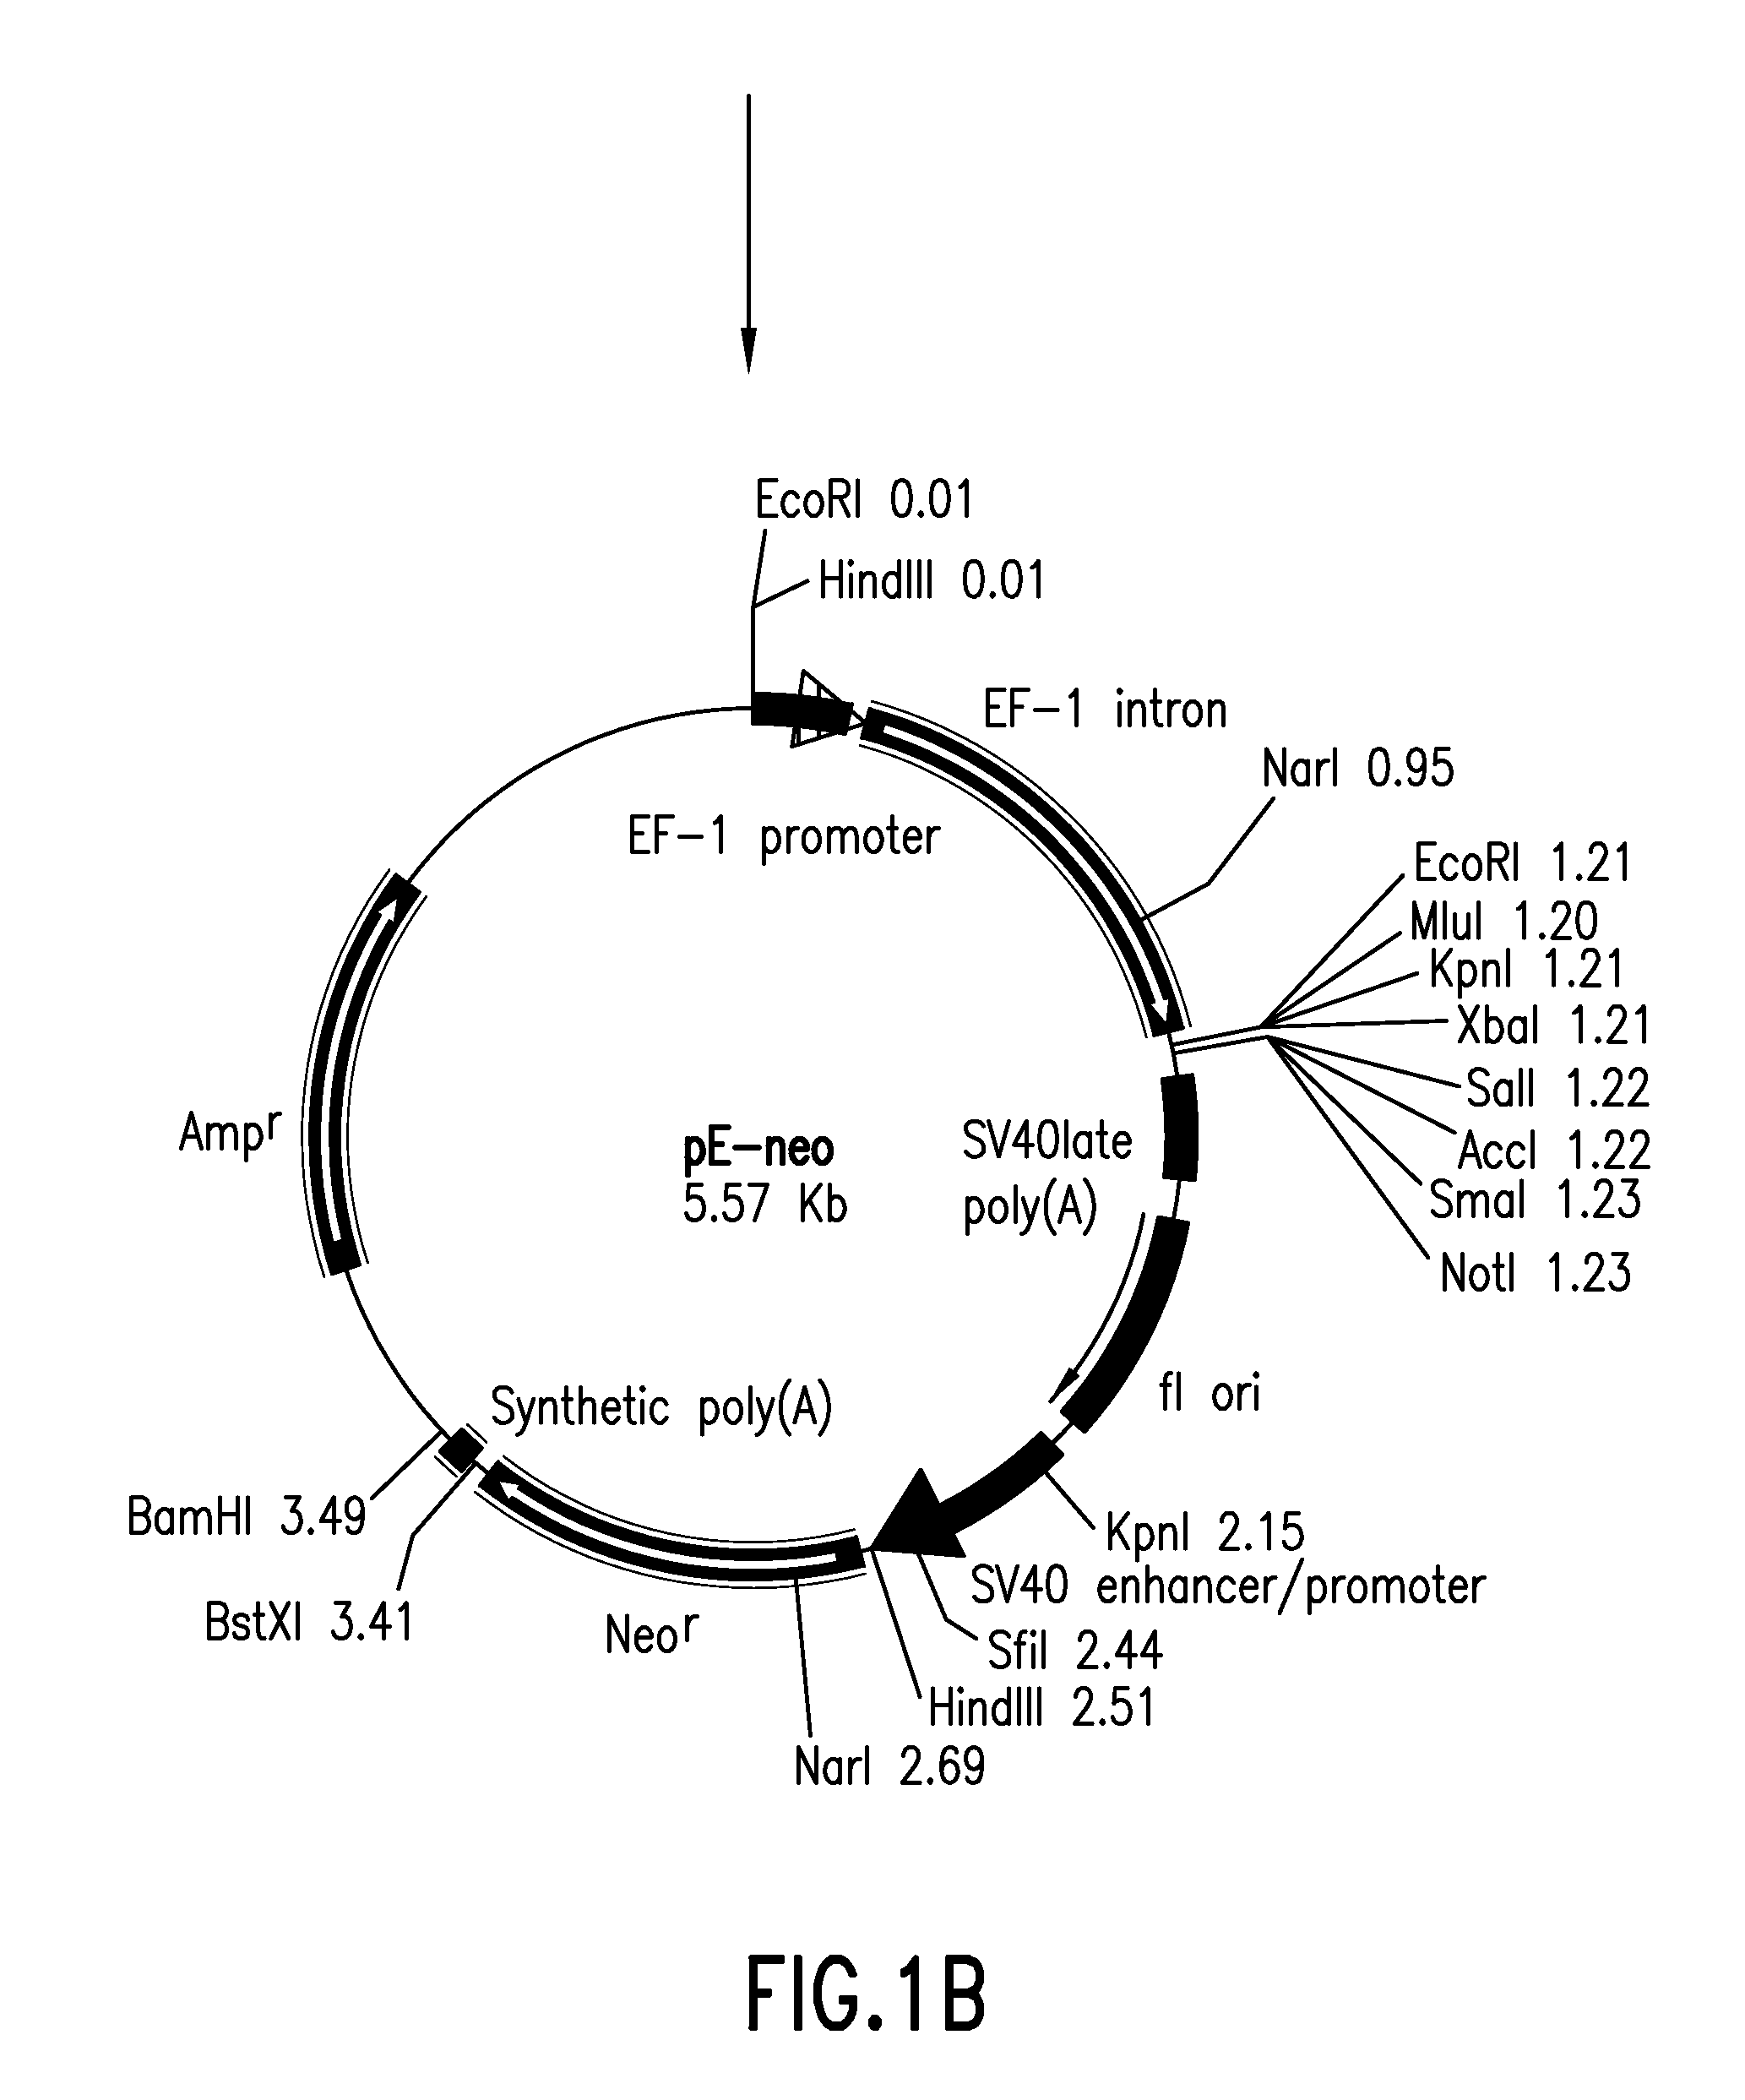 Method for Production of Recombinant Human FSH